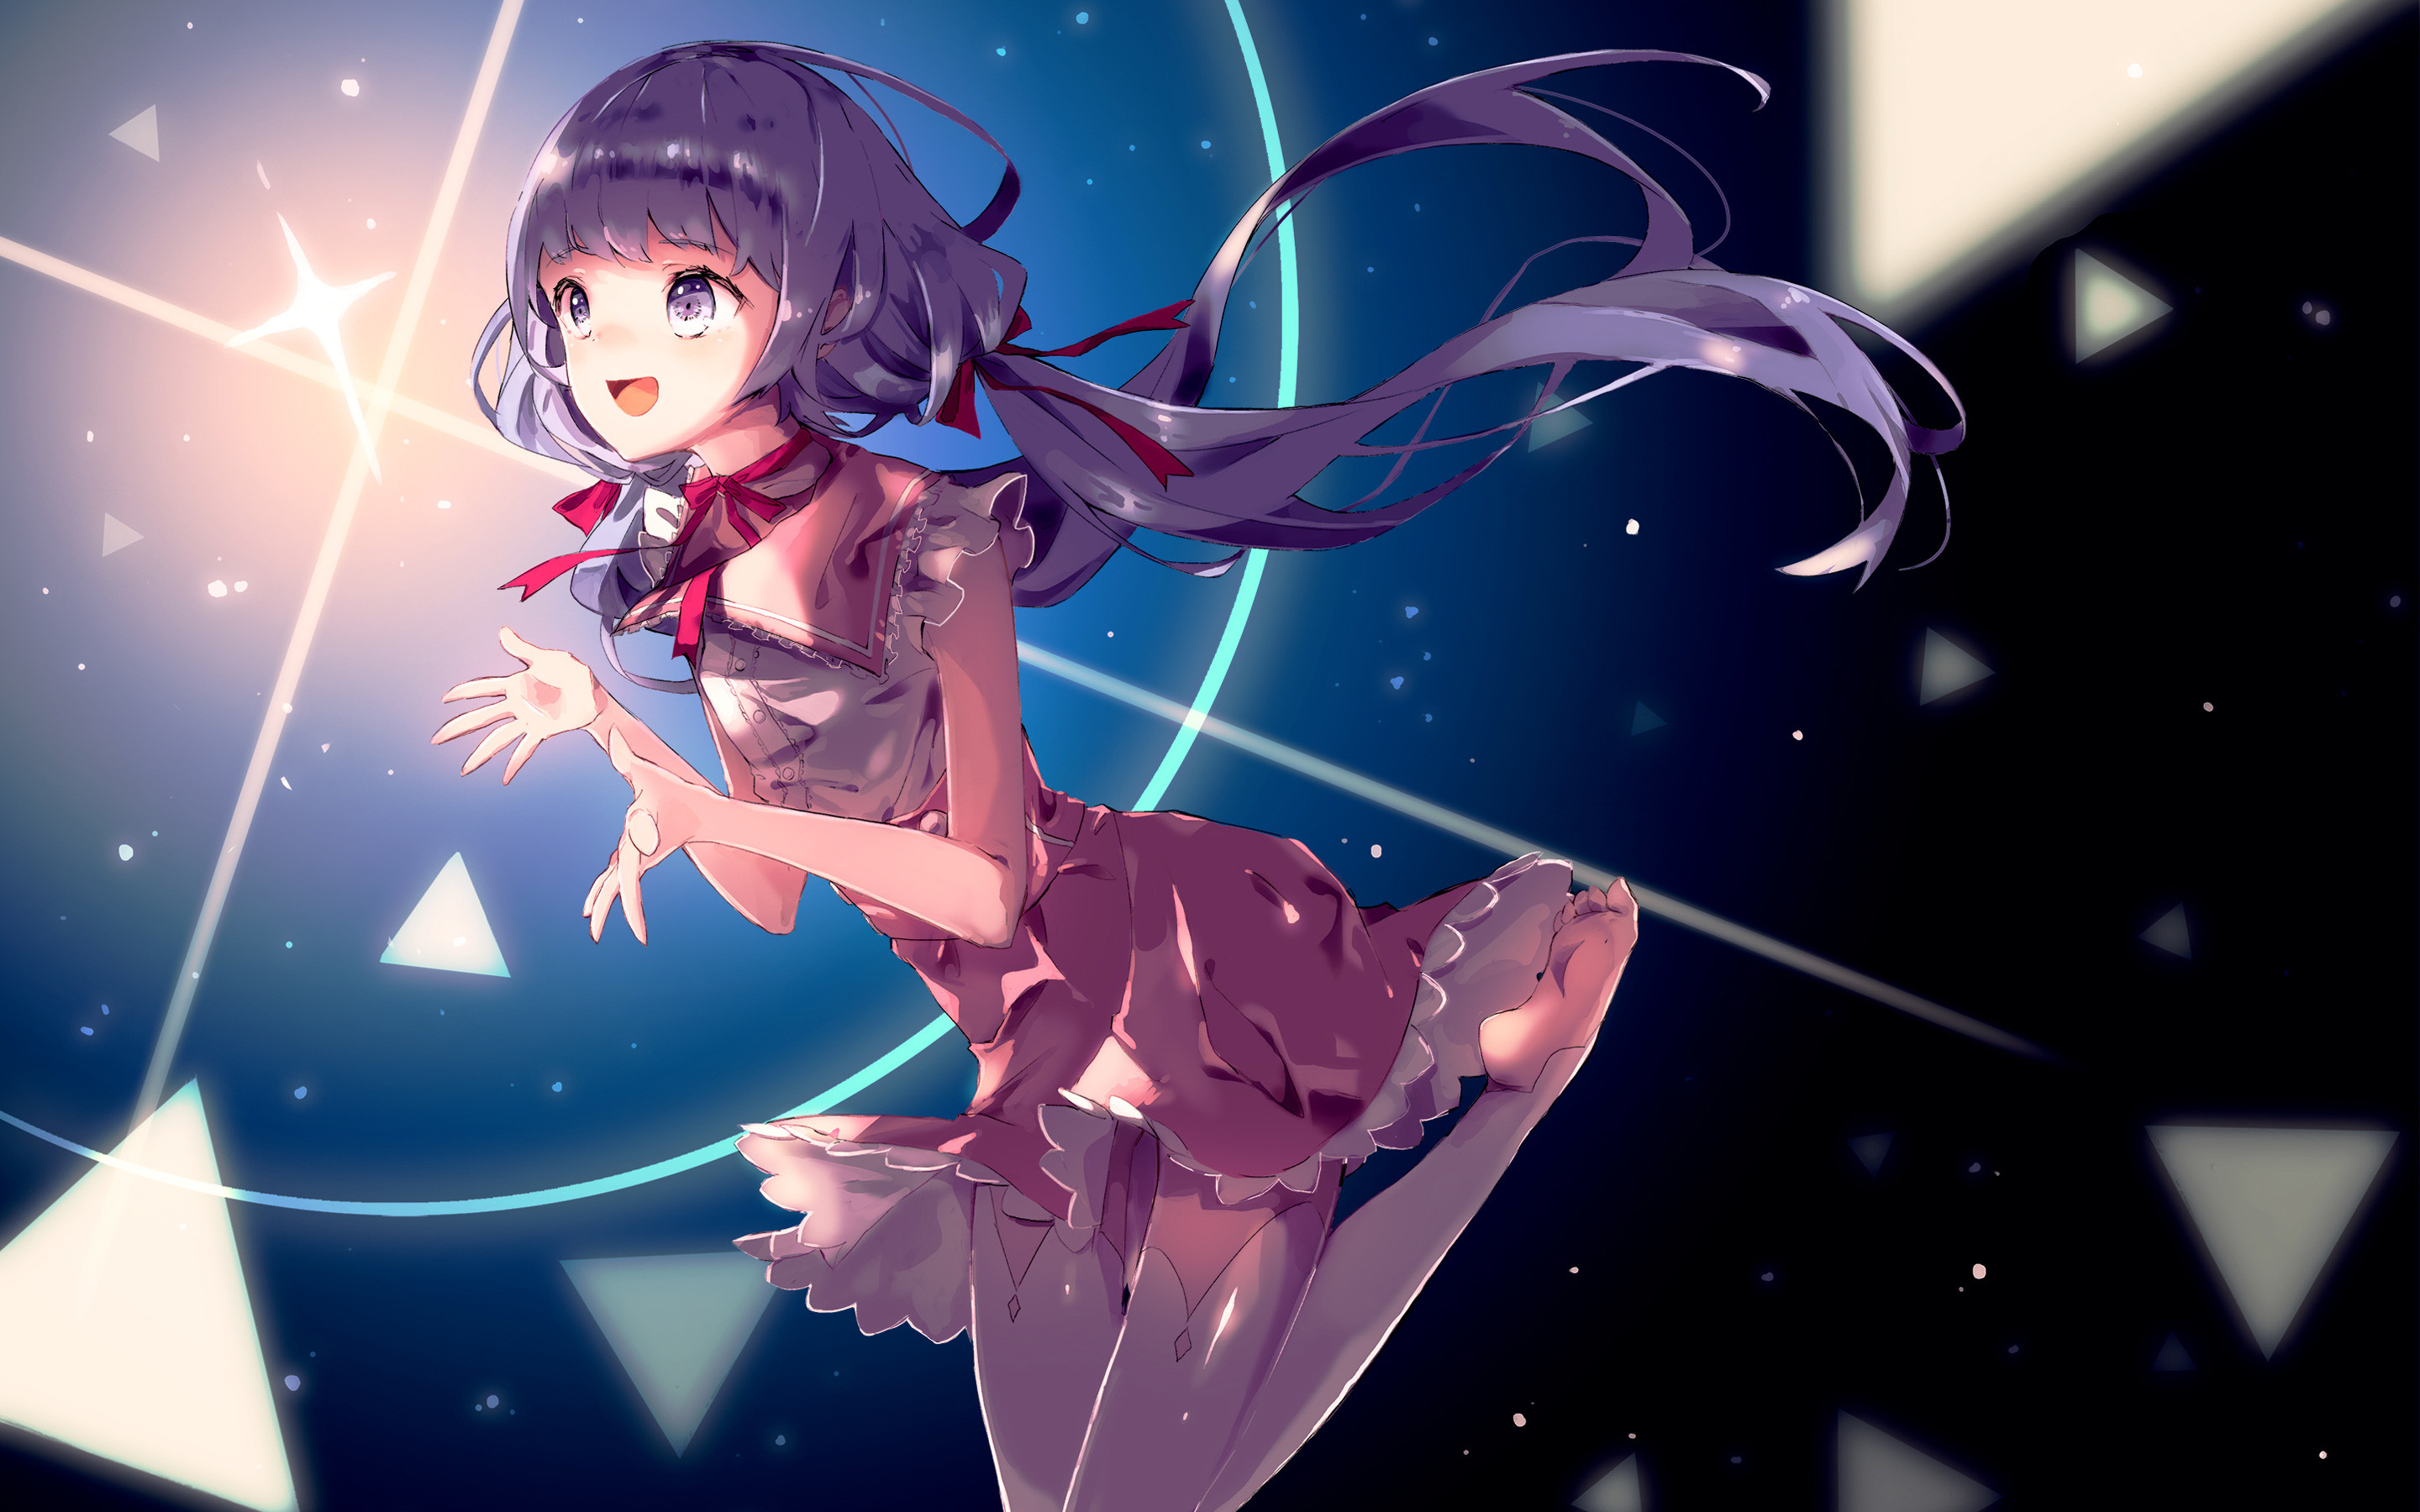 2880x1800 ... Anime Girl Wallpapers High Resolution HD Wallpapers, Backgrounds .